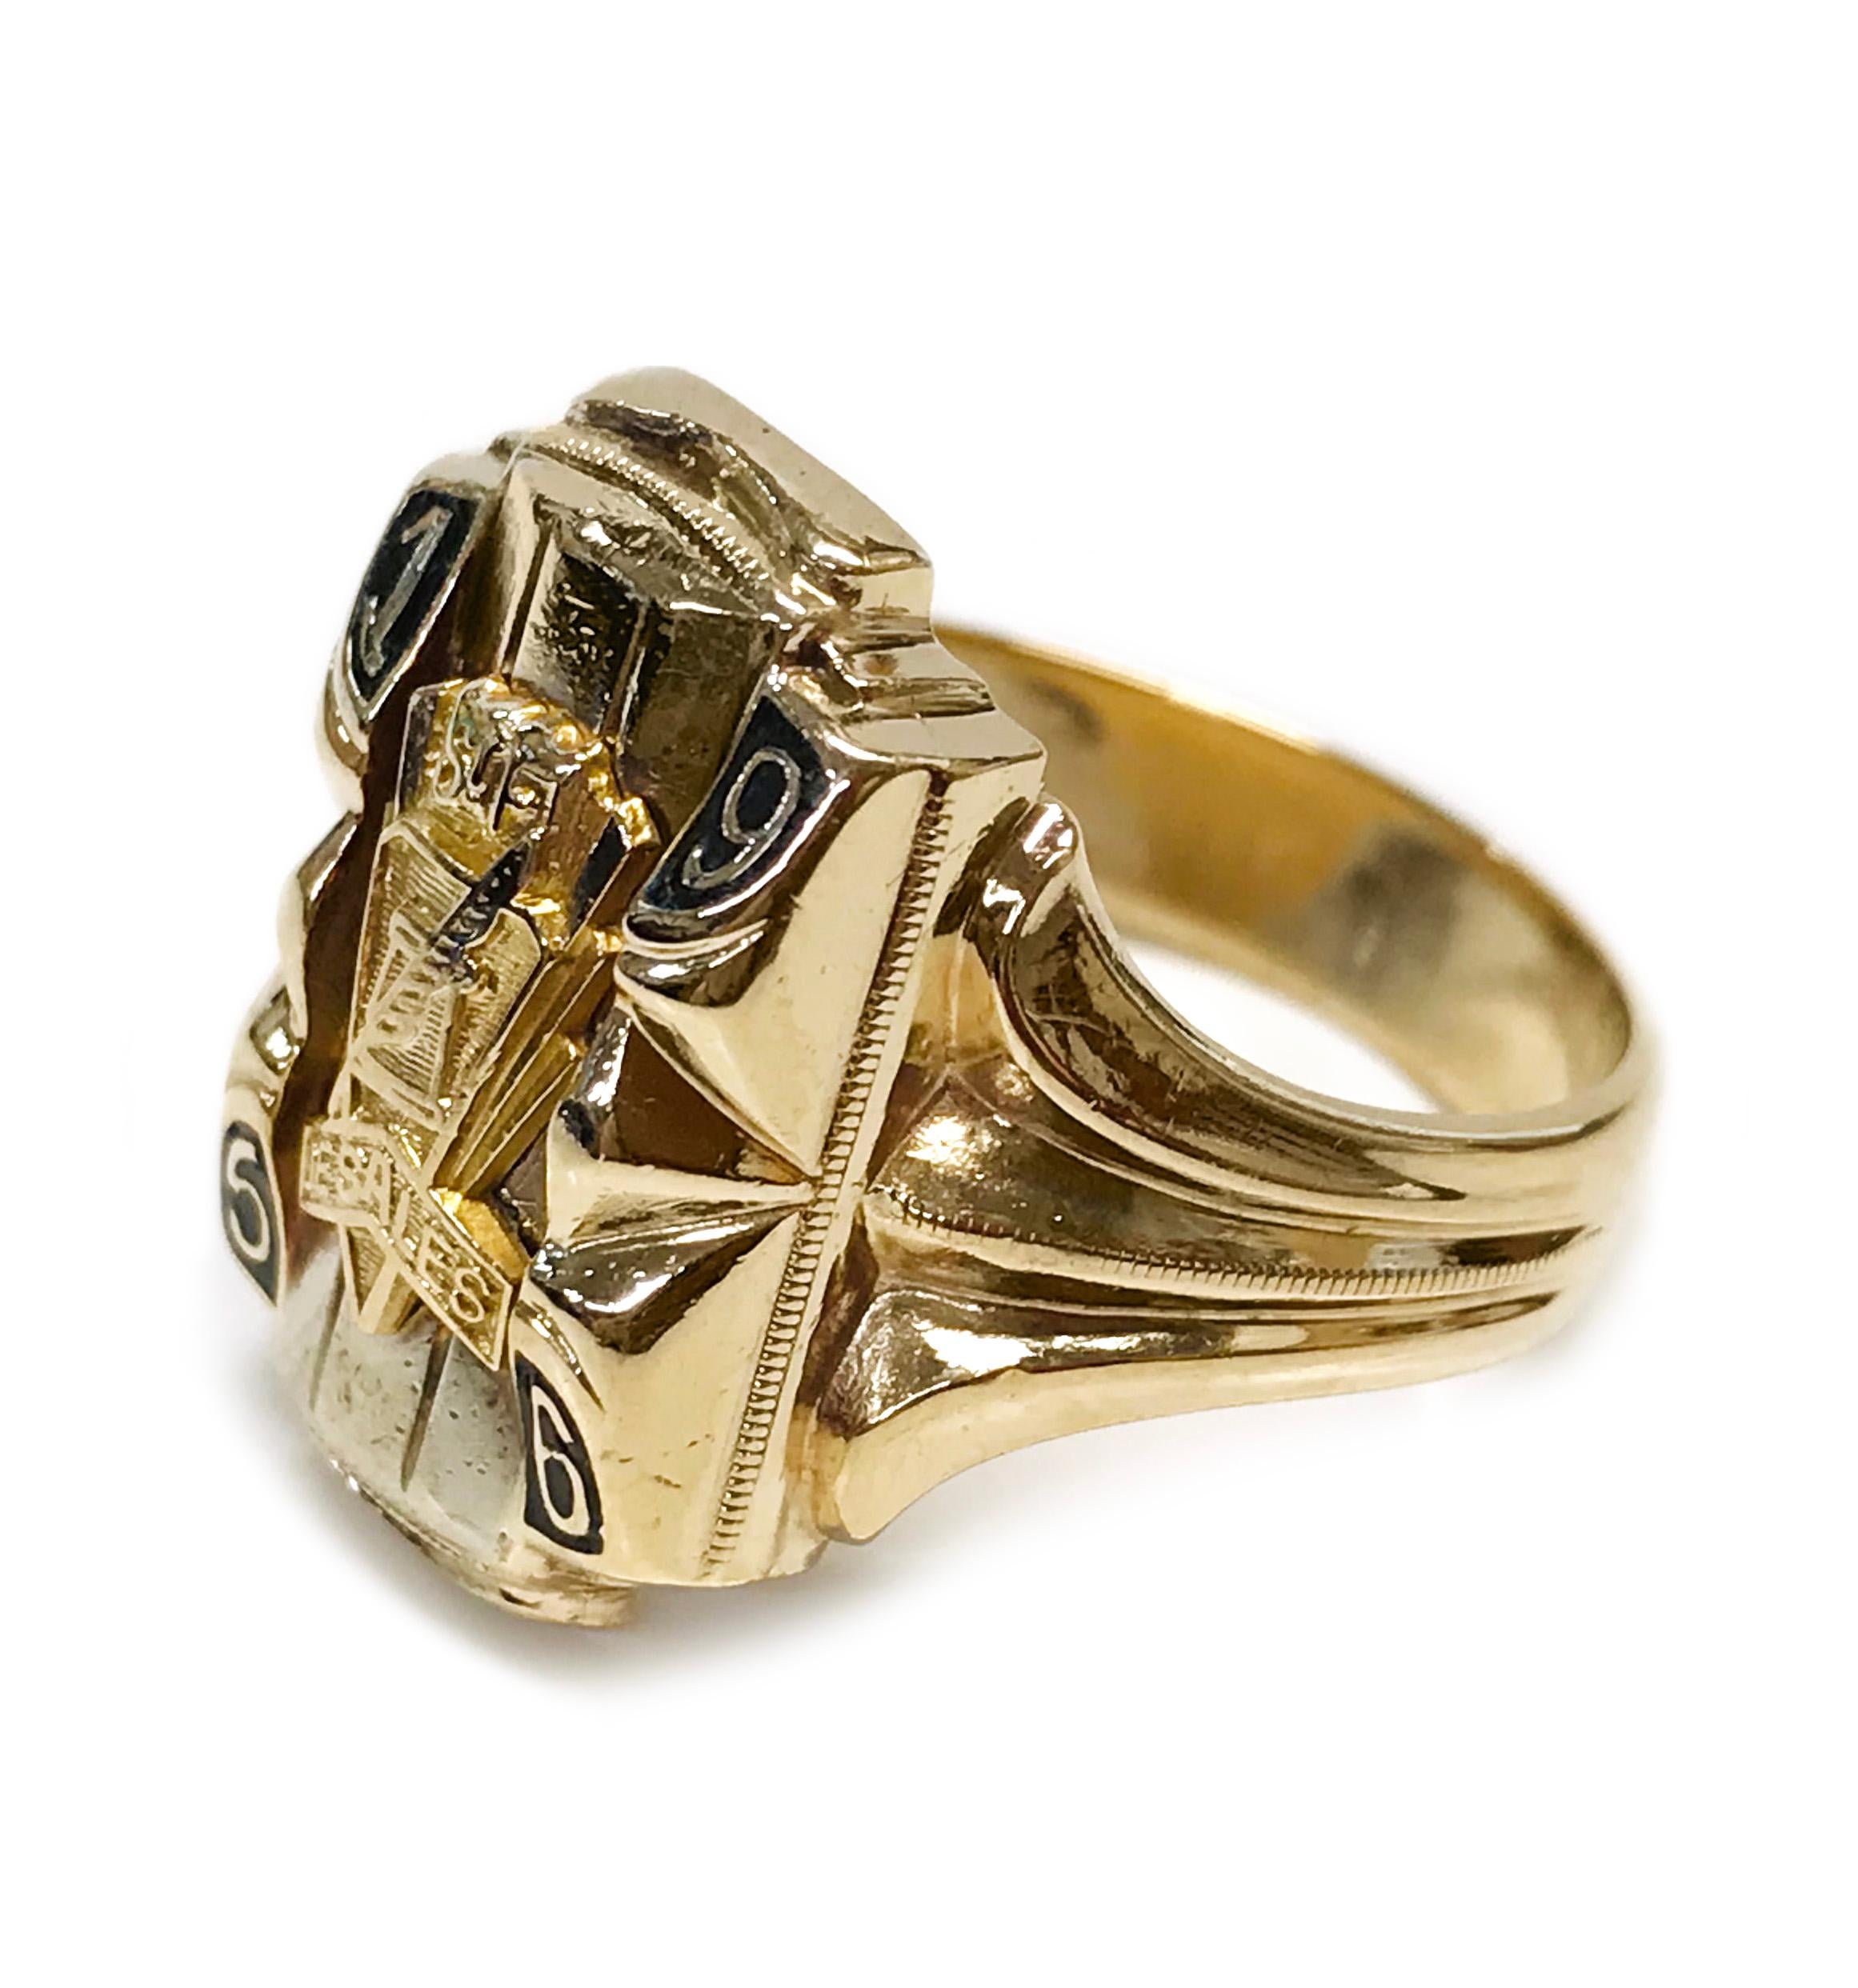 10 Karat 1956 Desales Class Ring. The ring features the letters St F, an inkwell and plume, and Desales on the front and center of the ring. The numbers 1, 9, 5, and 6 appear on each corner of the front with black enamel as the background. Engraved